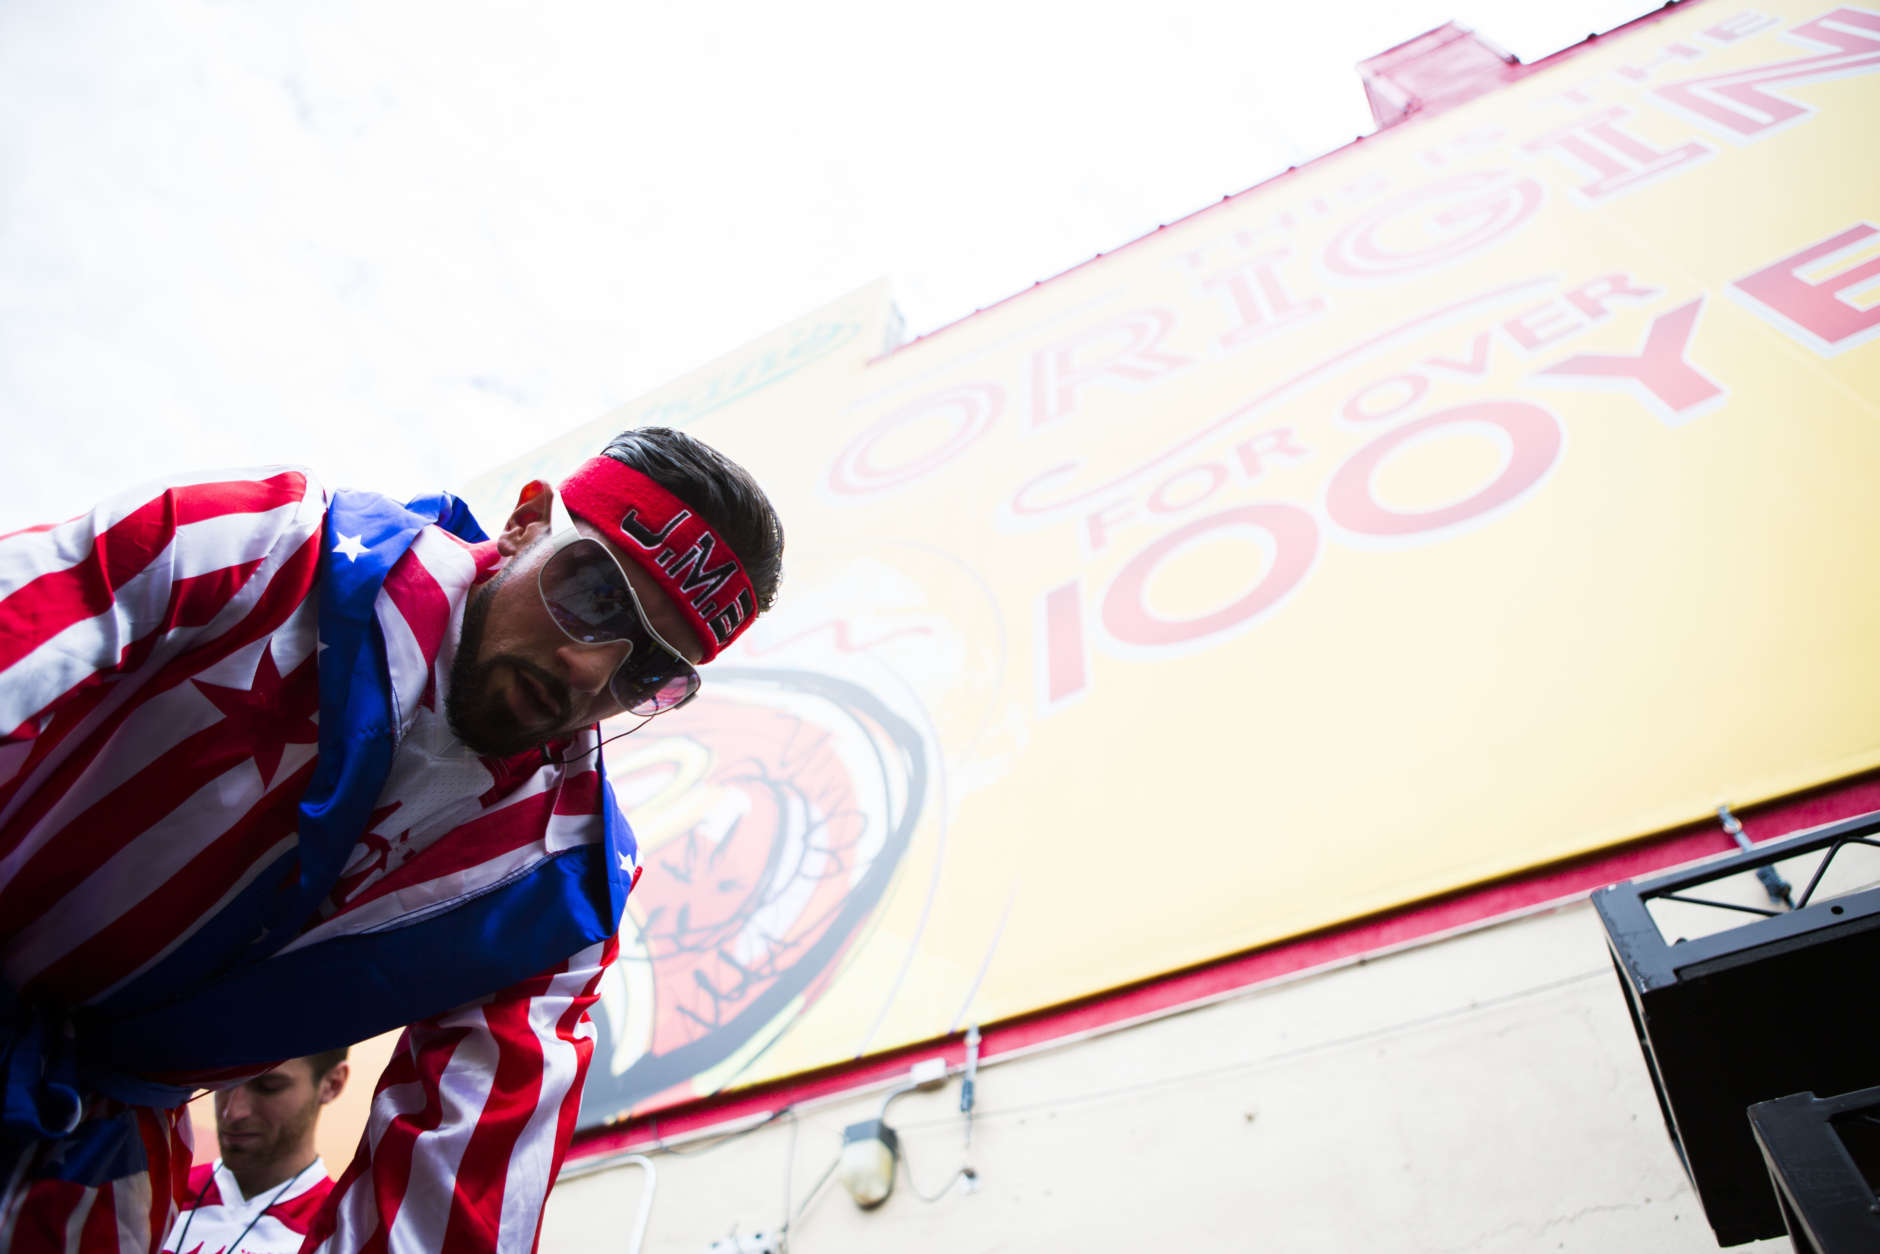 Juan Rodriguez stretch before for competing in the Nathan's Famous Hotdog eating contest Tuesday, July 4, 2017, in Brooklyn, New York. (AP Photo/Michael Noble Jr.)